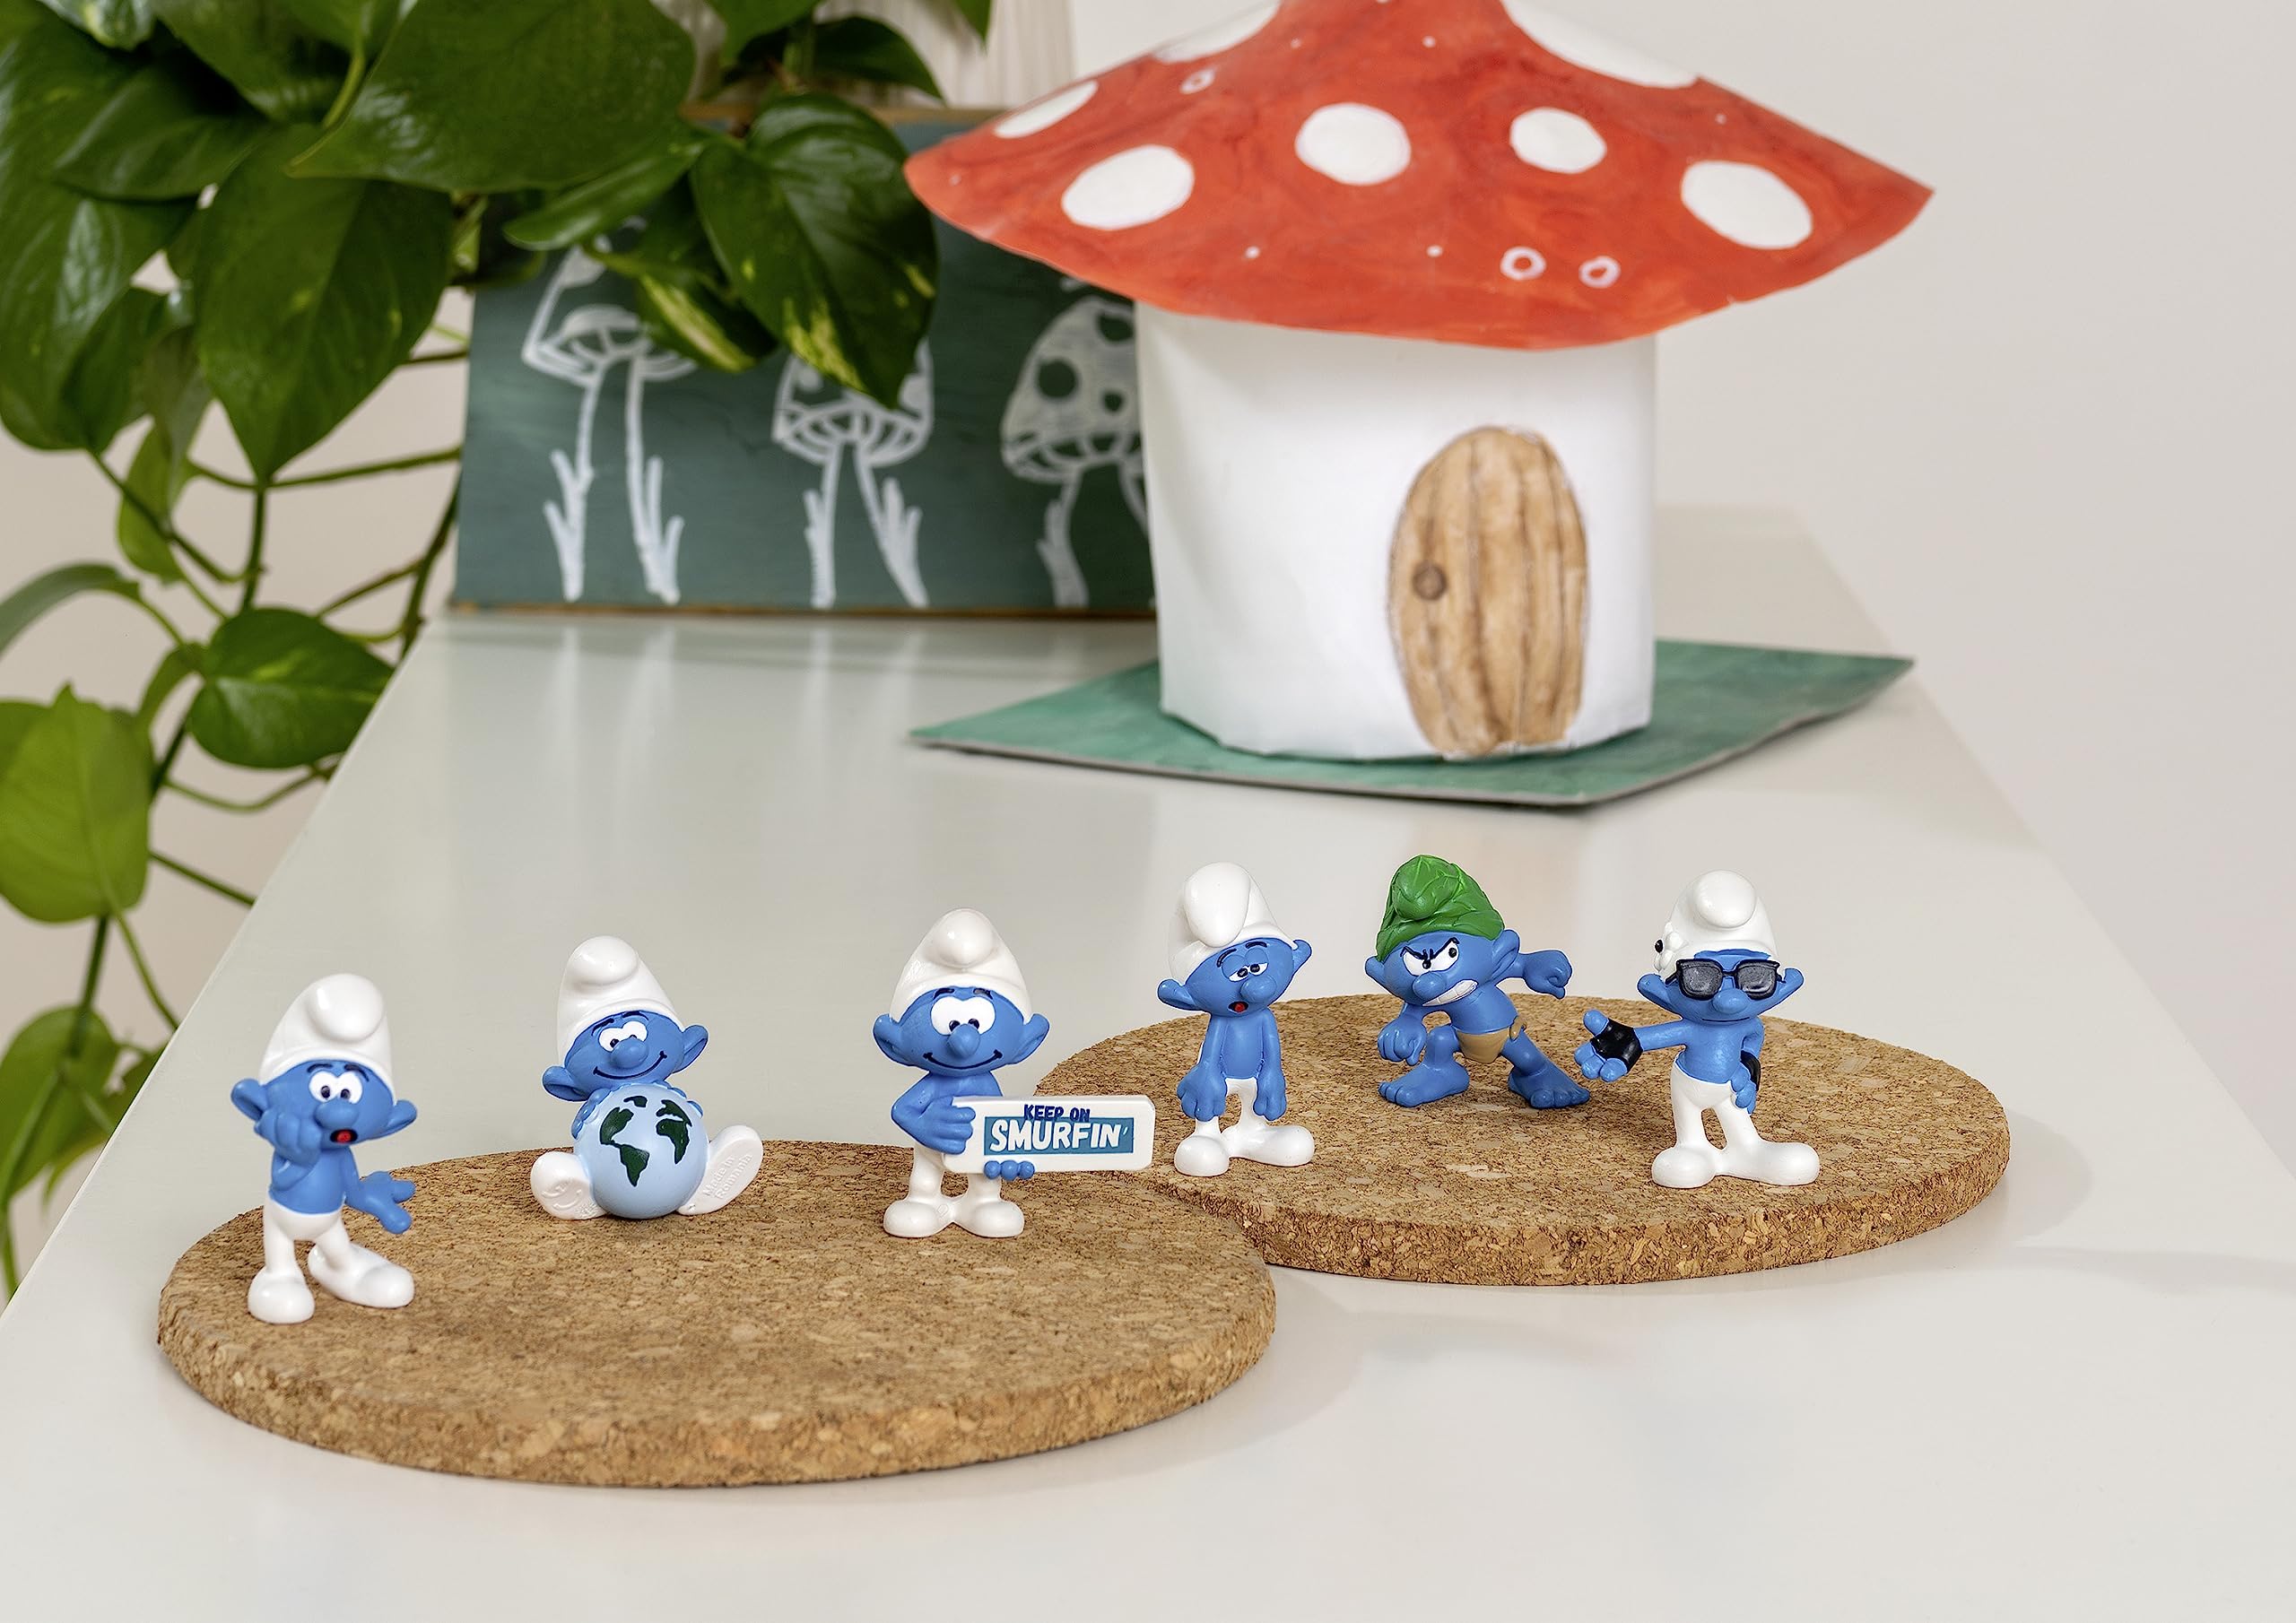 Schleich Smurfs, Collectible Retro Toys and Figurines for All Ages, Smurf Toy Figure Holding Keep on Smurfin' Sign